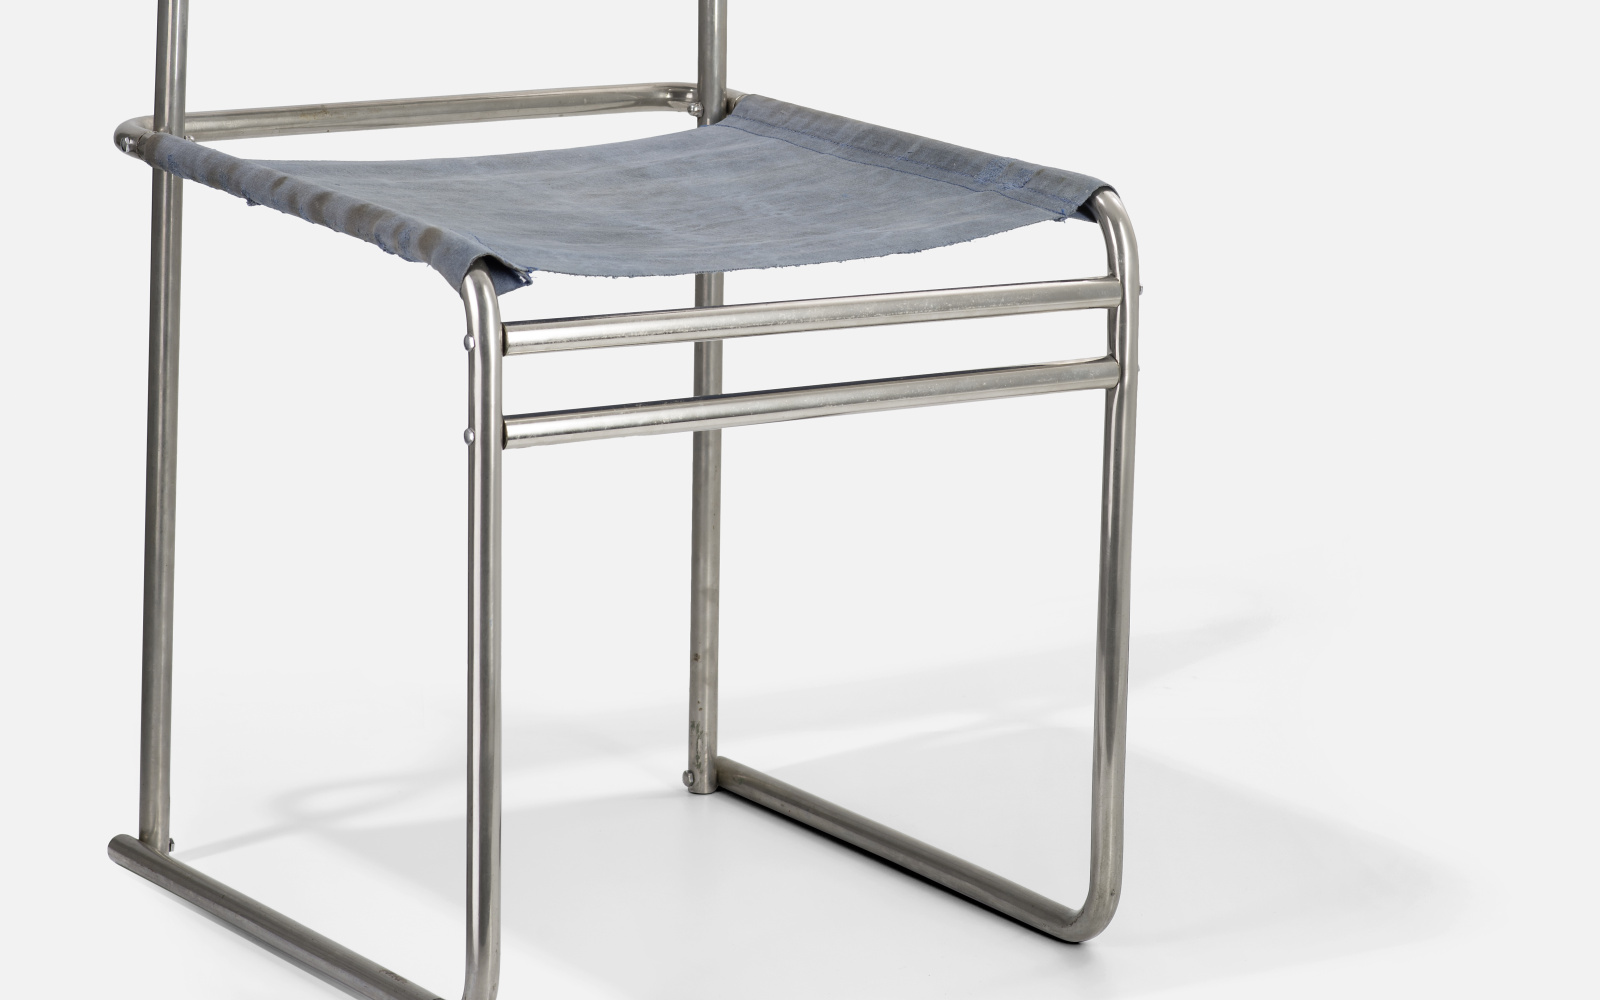 A chair whose frame consists of metal rods. The seat and back are made of fabric.